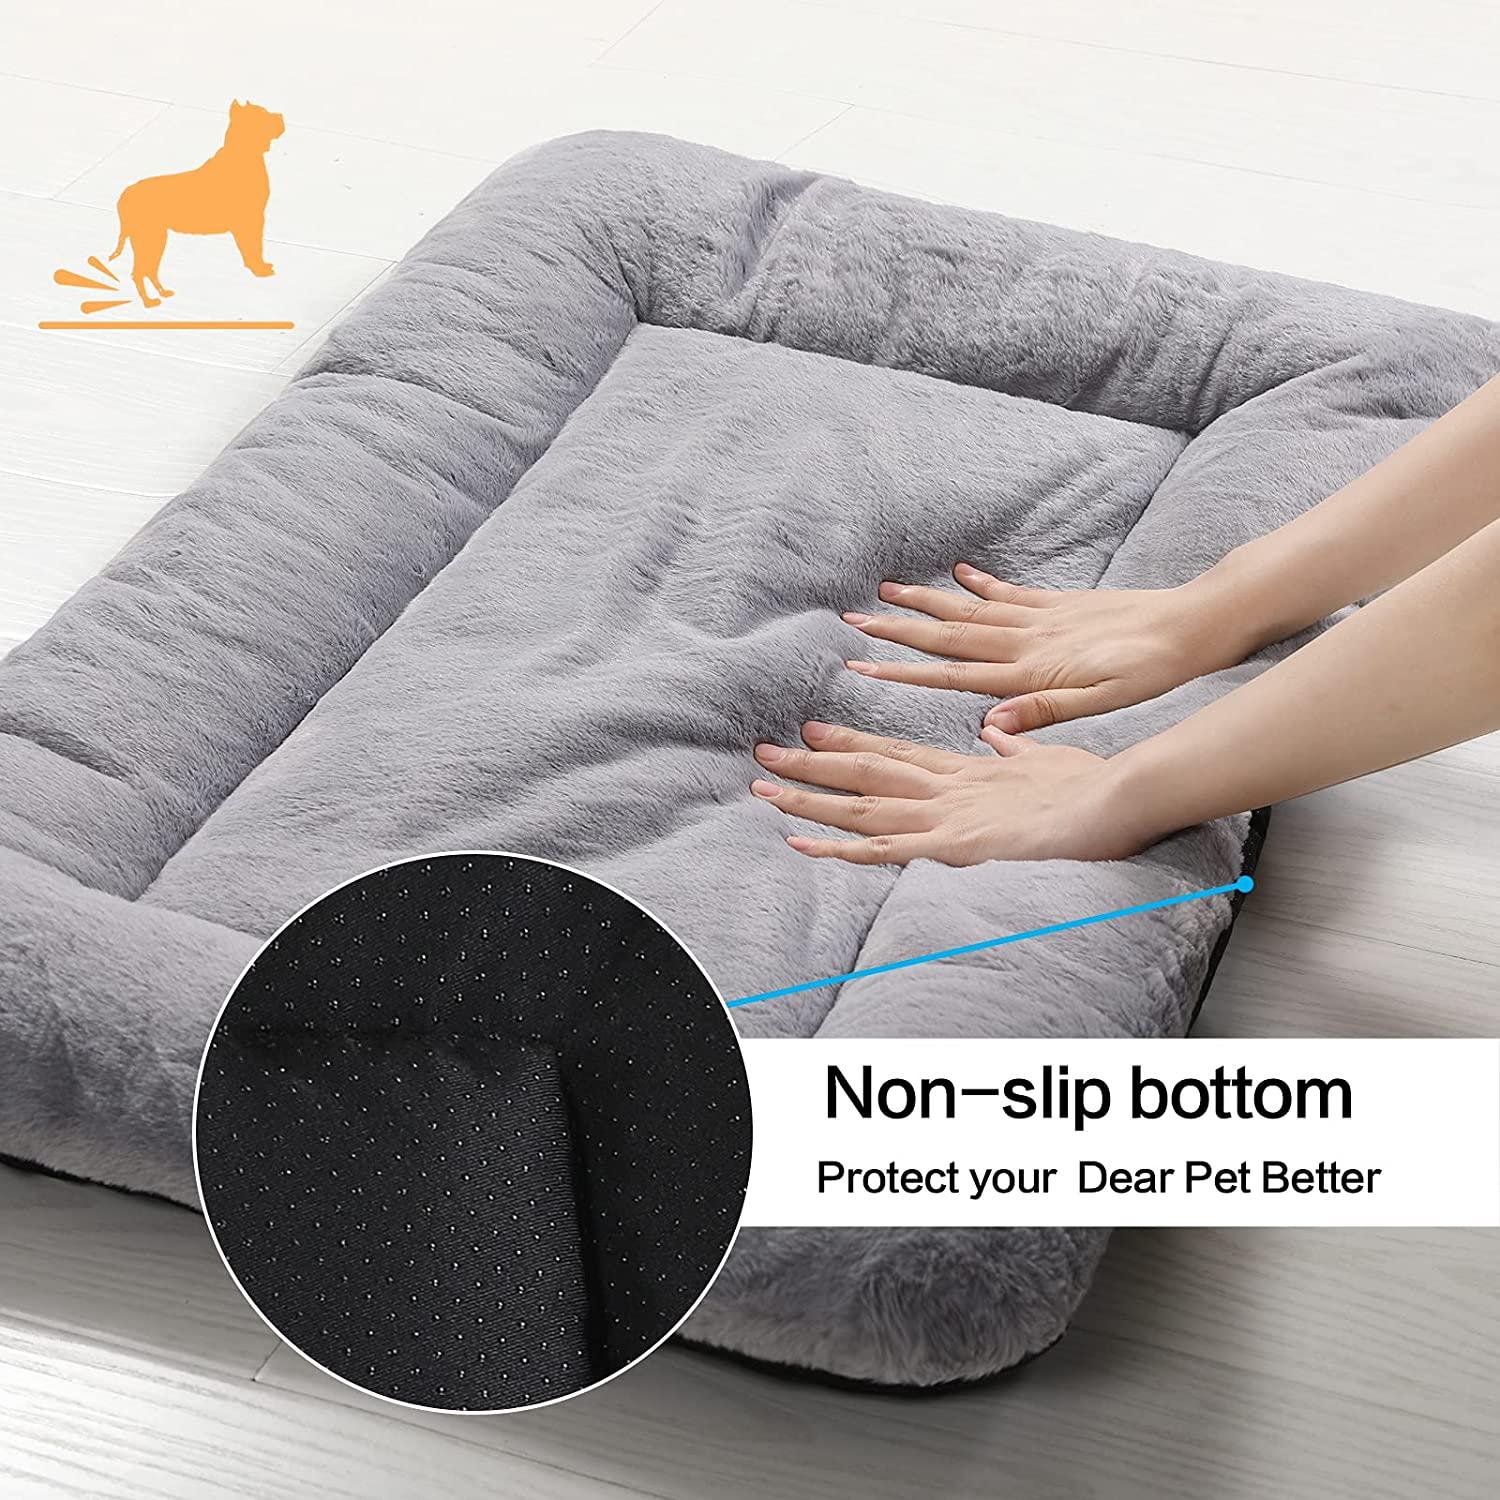 Soft And Comfortable Anti Slip Dog And Puppies Bed Mats Under The